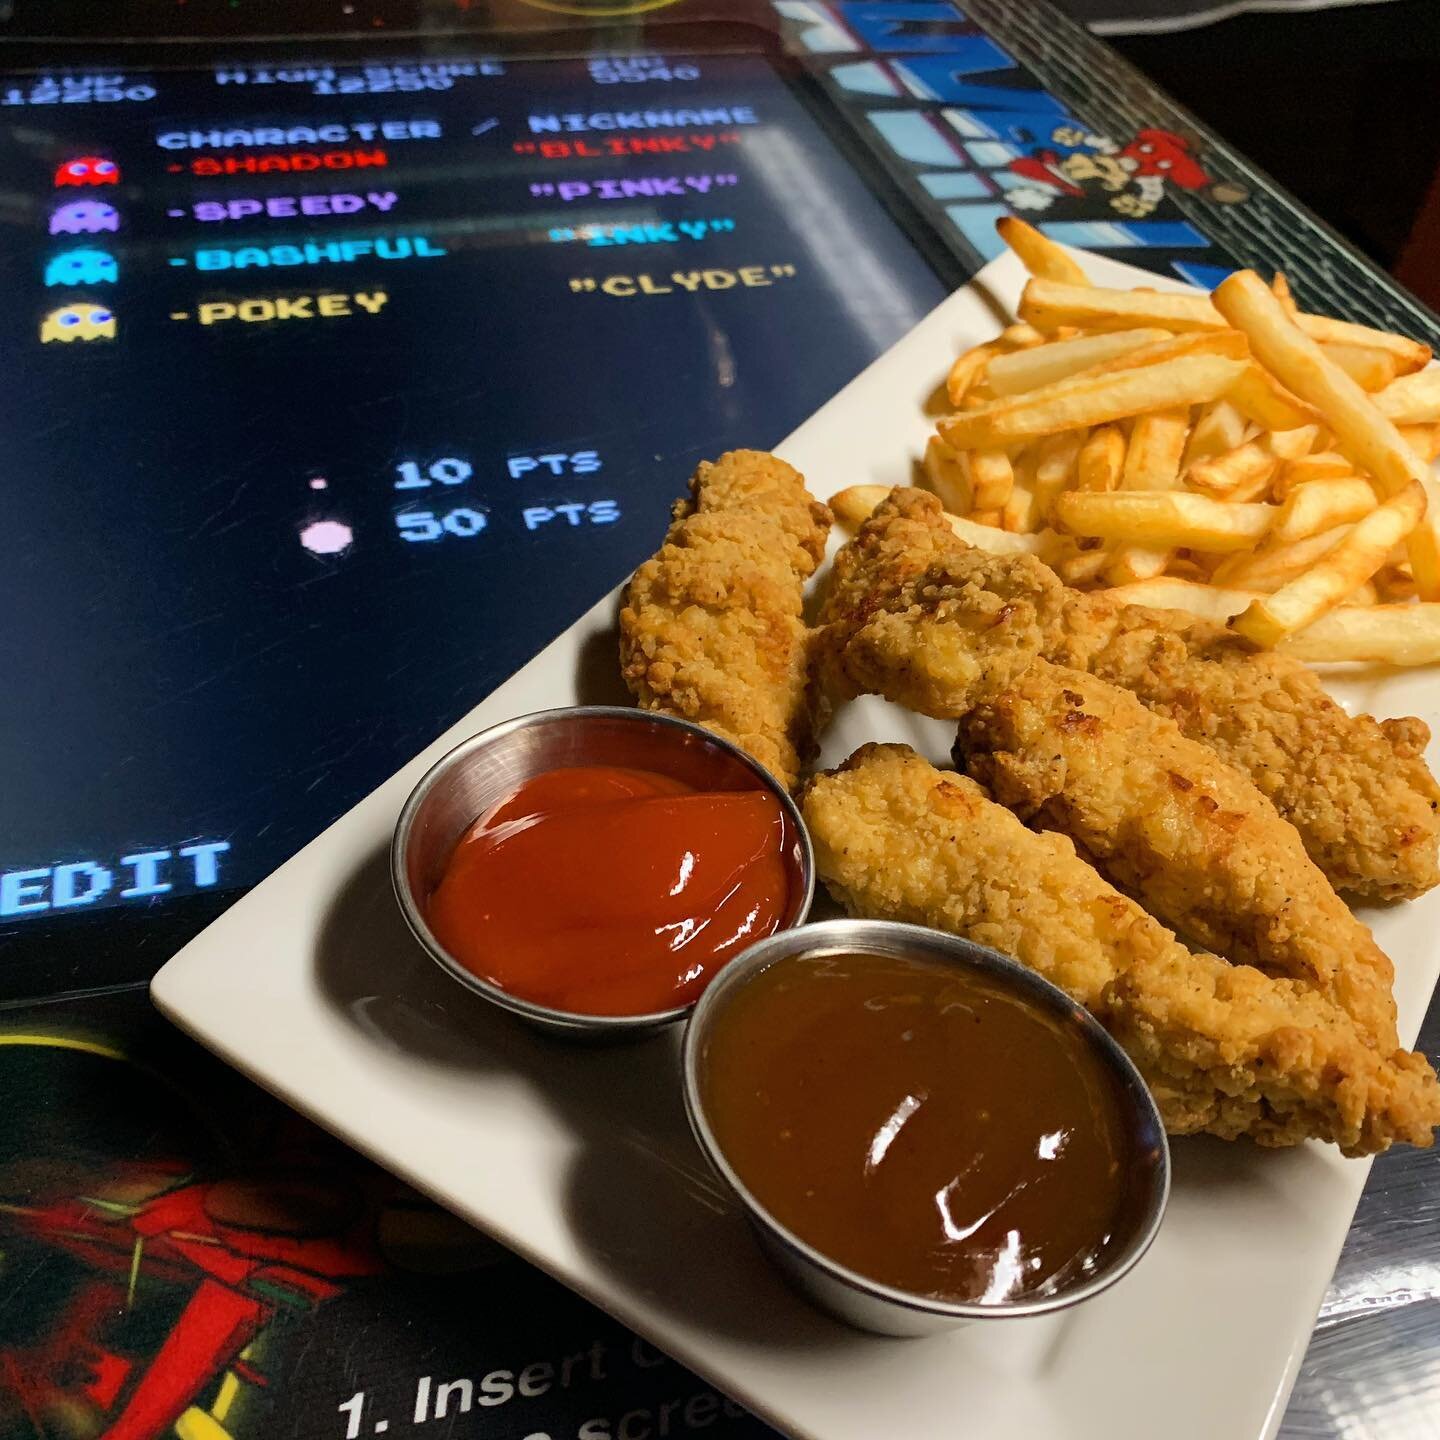 Did anyone else&rsquo;s childhood consist of #arcade games and #chicken strips? #nostalgia